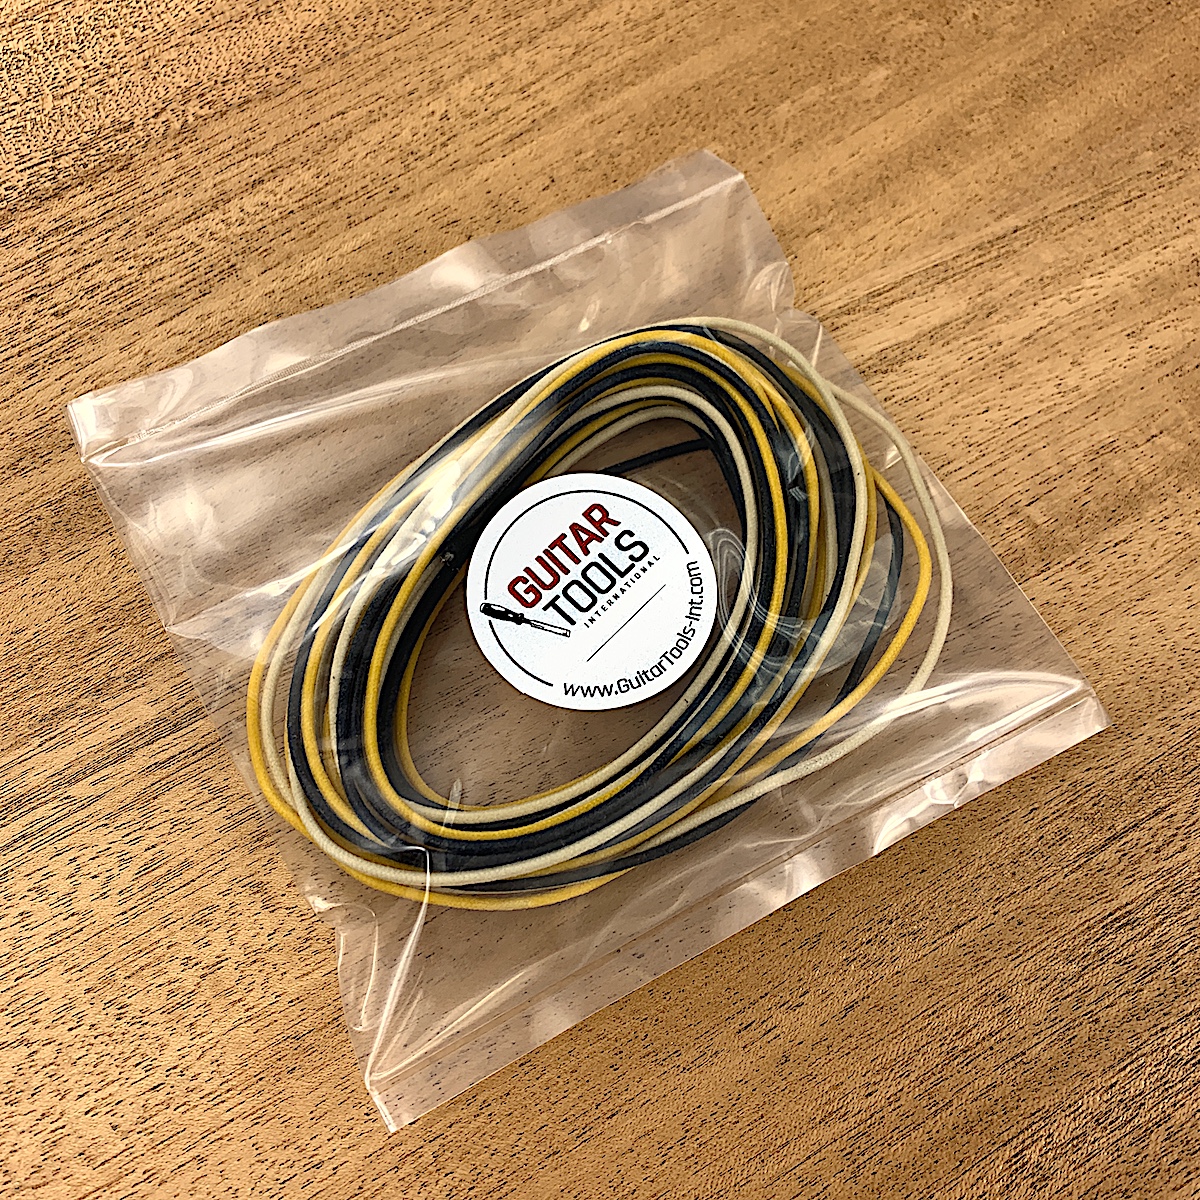 22Awg Vintage-Style Guitar Wire Cloth-Covered Pre-Tinned PushBack 